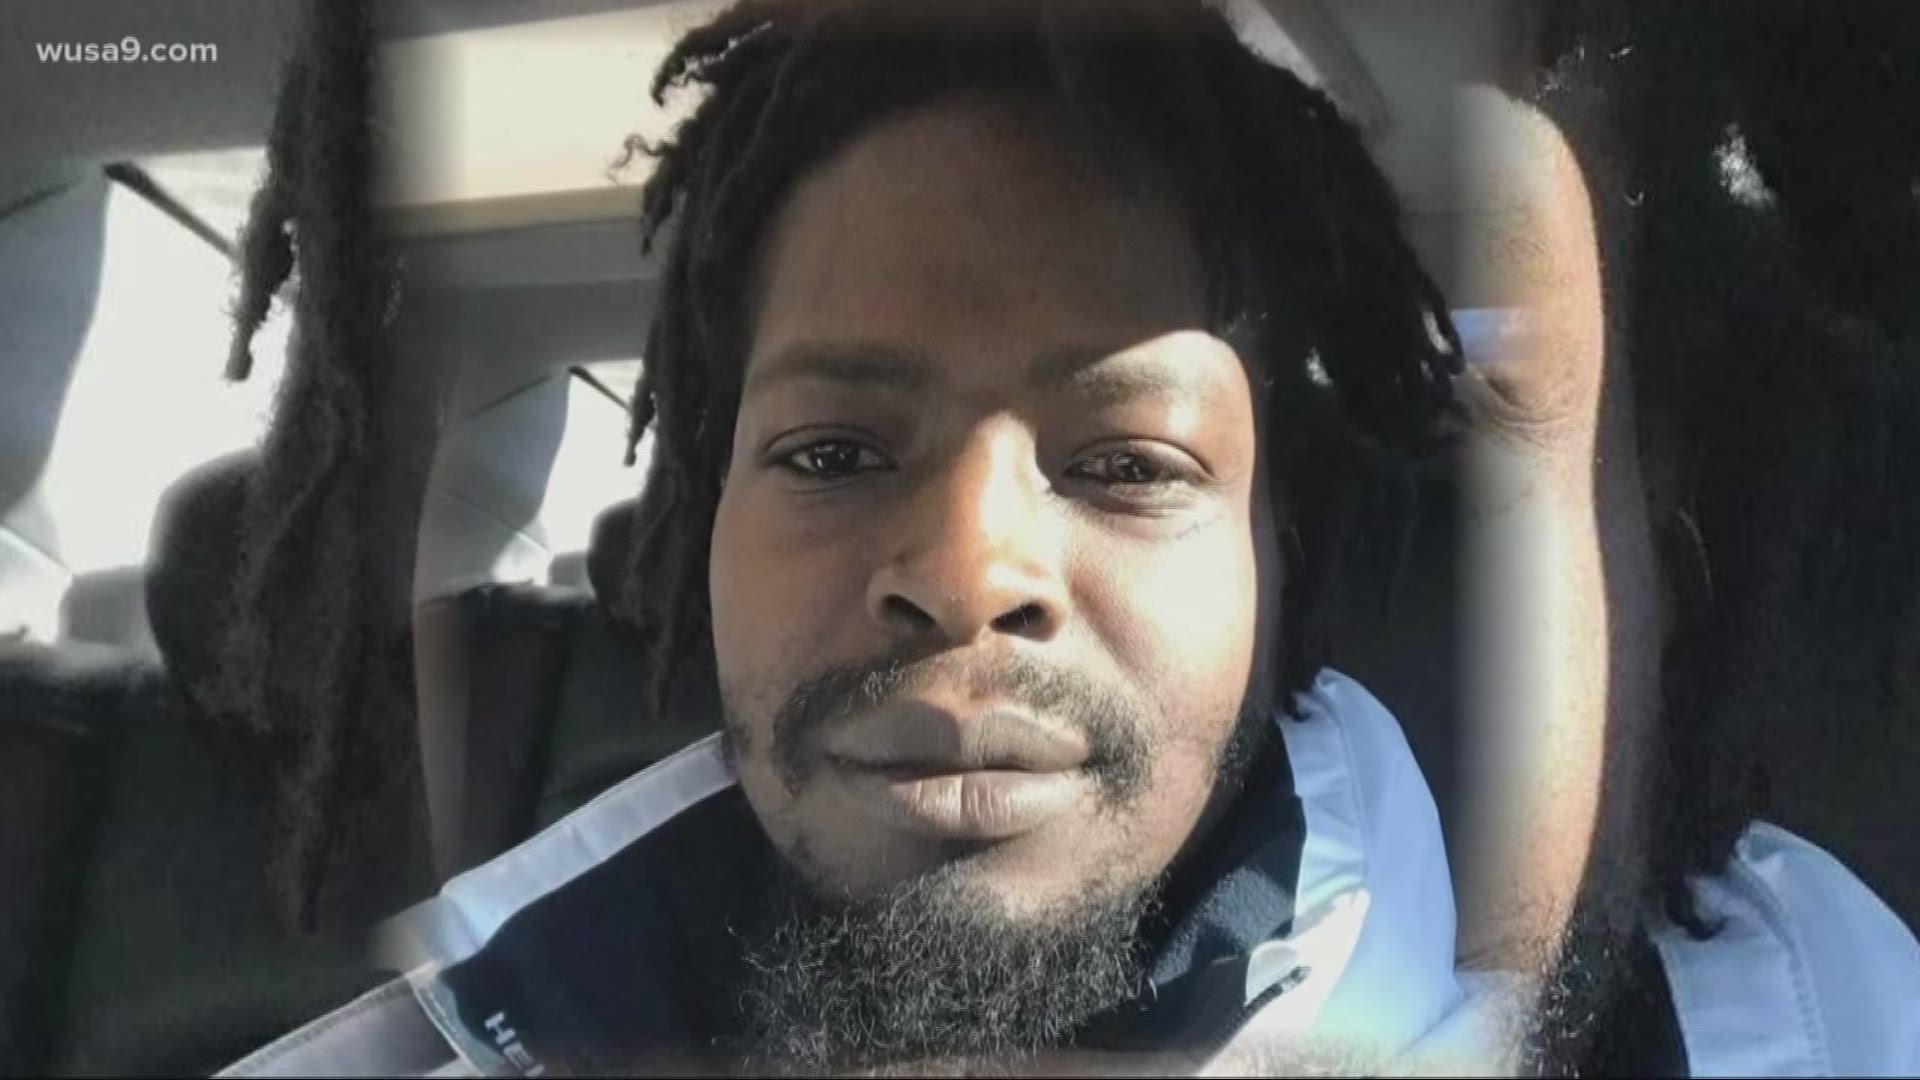 Patrick Baptiste was last seen on November 19th, according to police. His girlfriend, LaShawn Matthews says he was last heard and seen at his home on Ridge Road in Southeast.